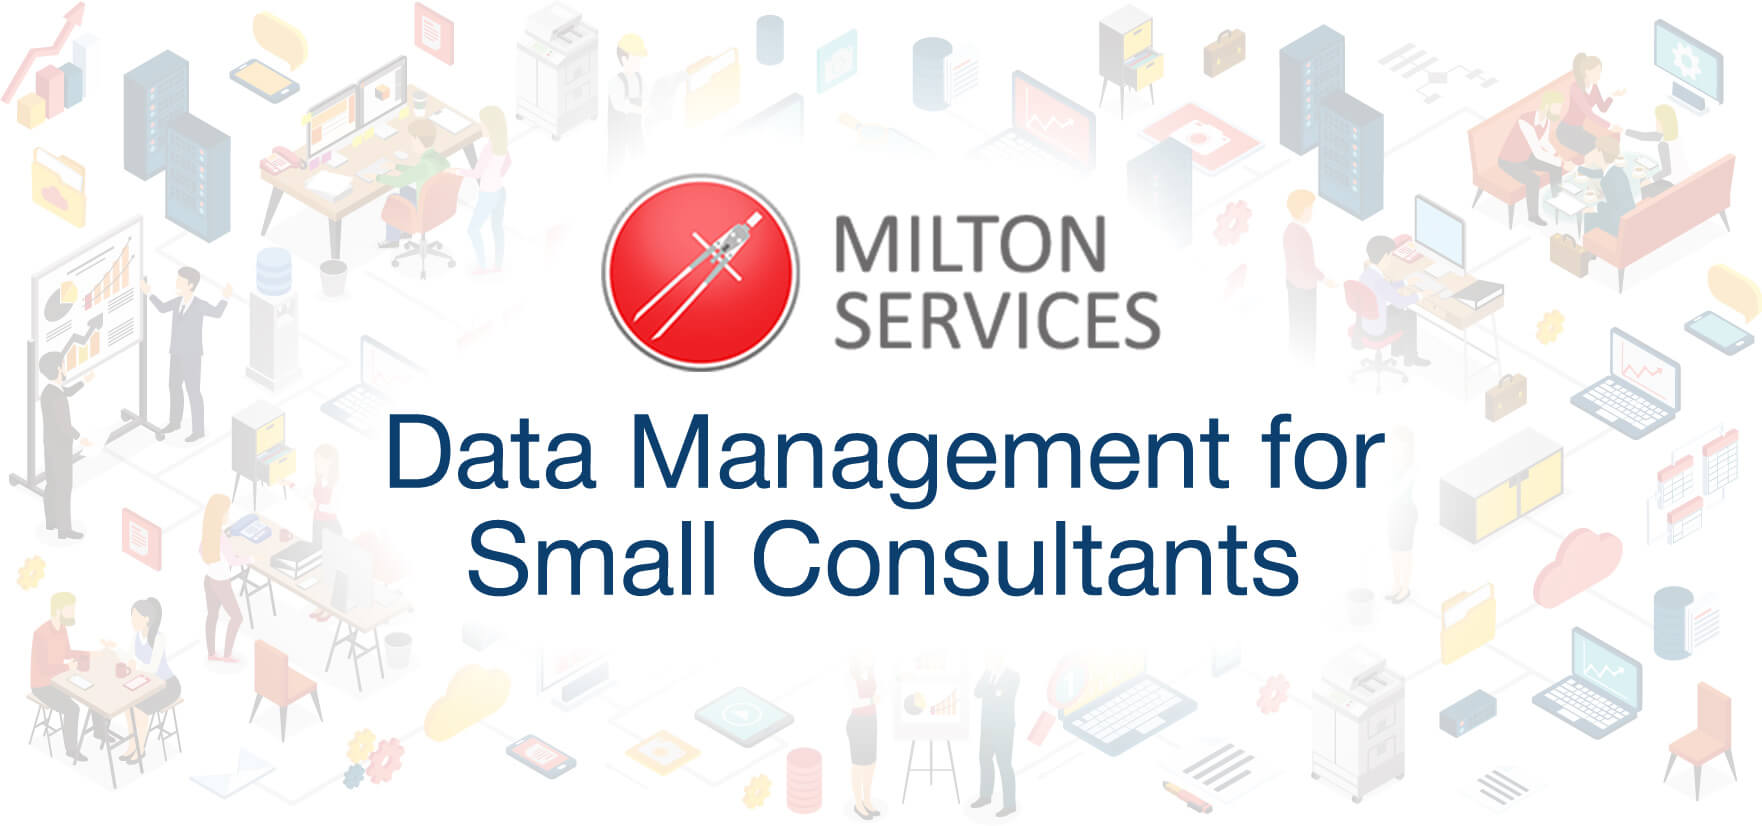 Milton Services: Data Management for Small Consultants